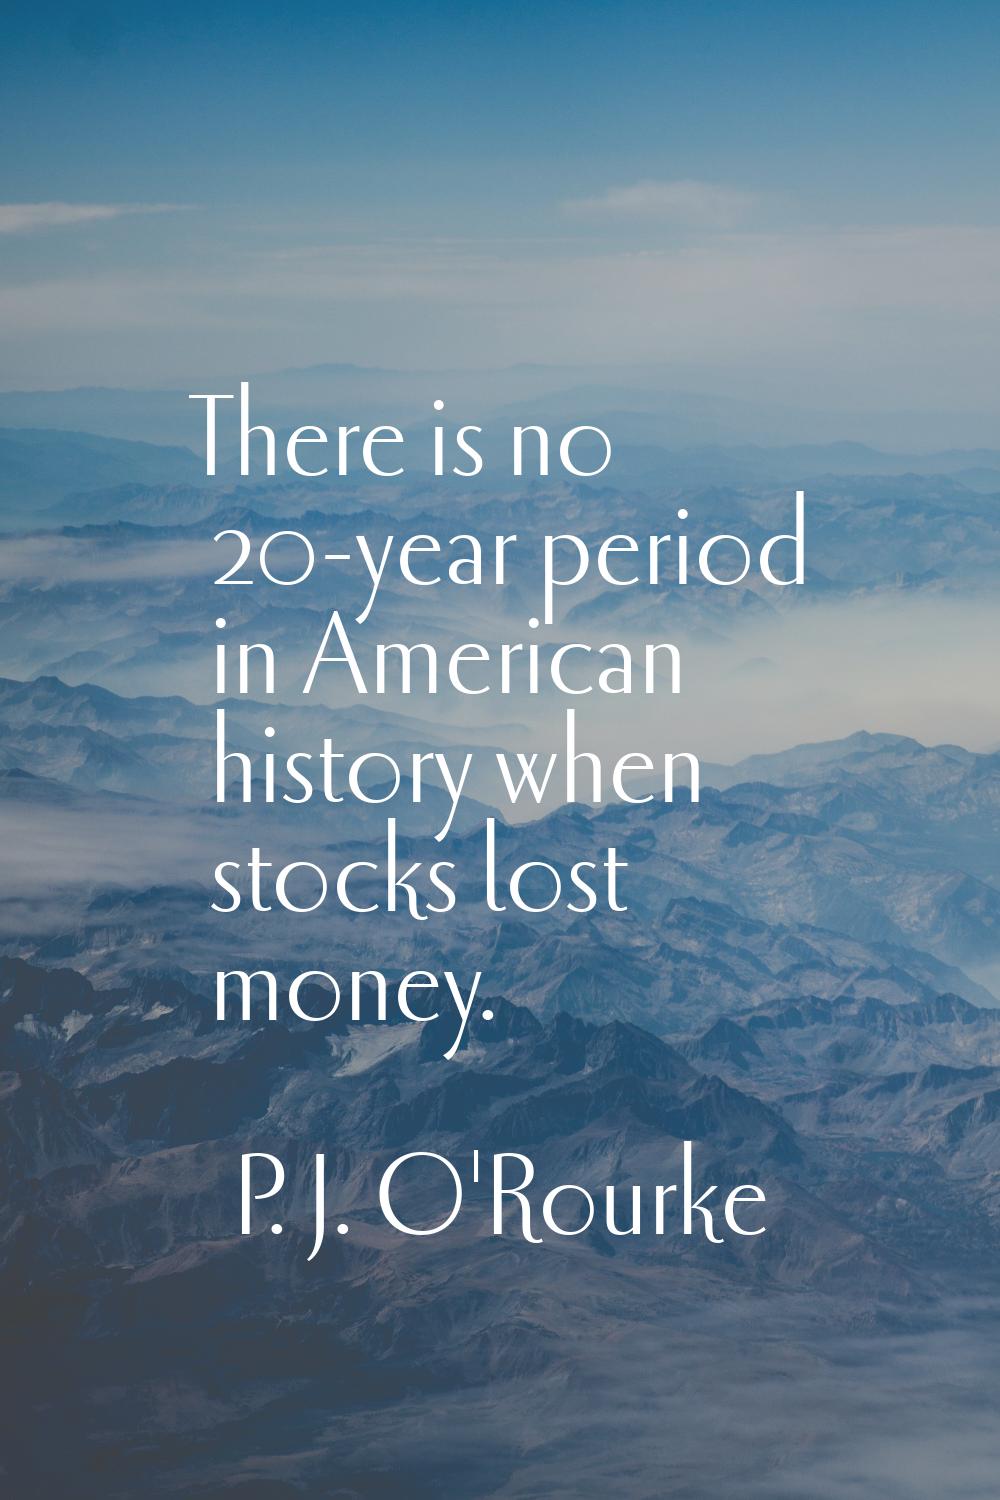 There is no 20-year period in American history when stocks lost money.